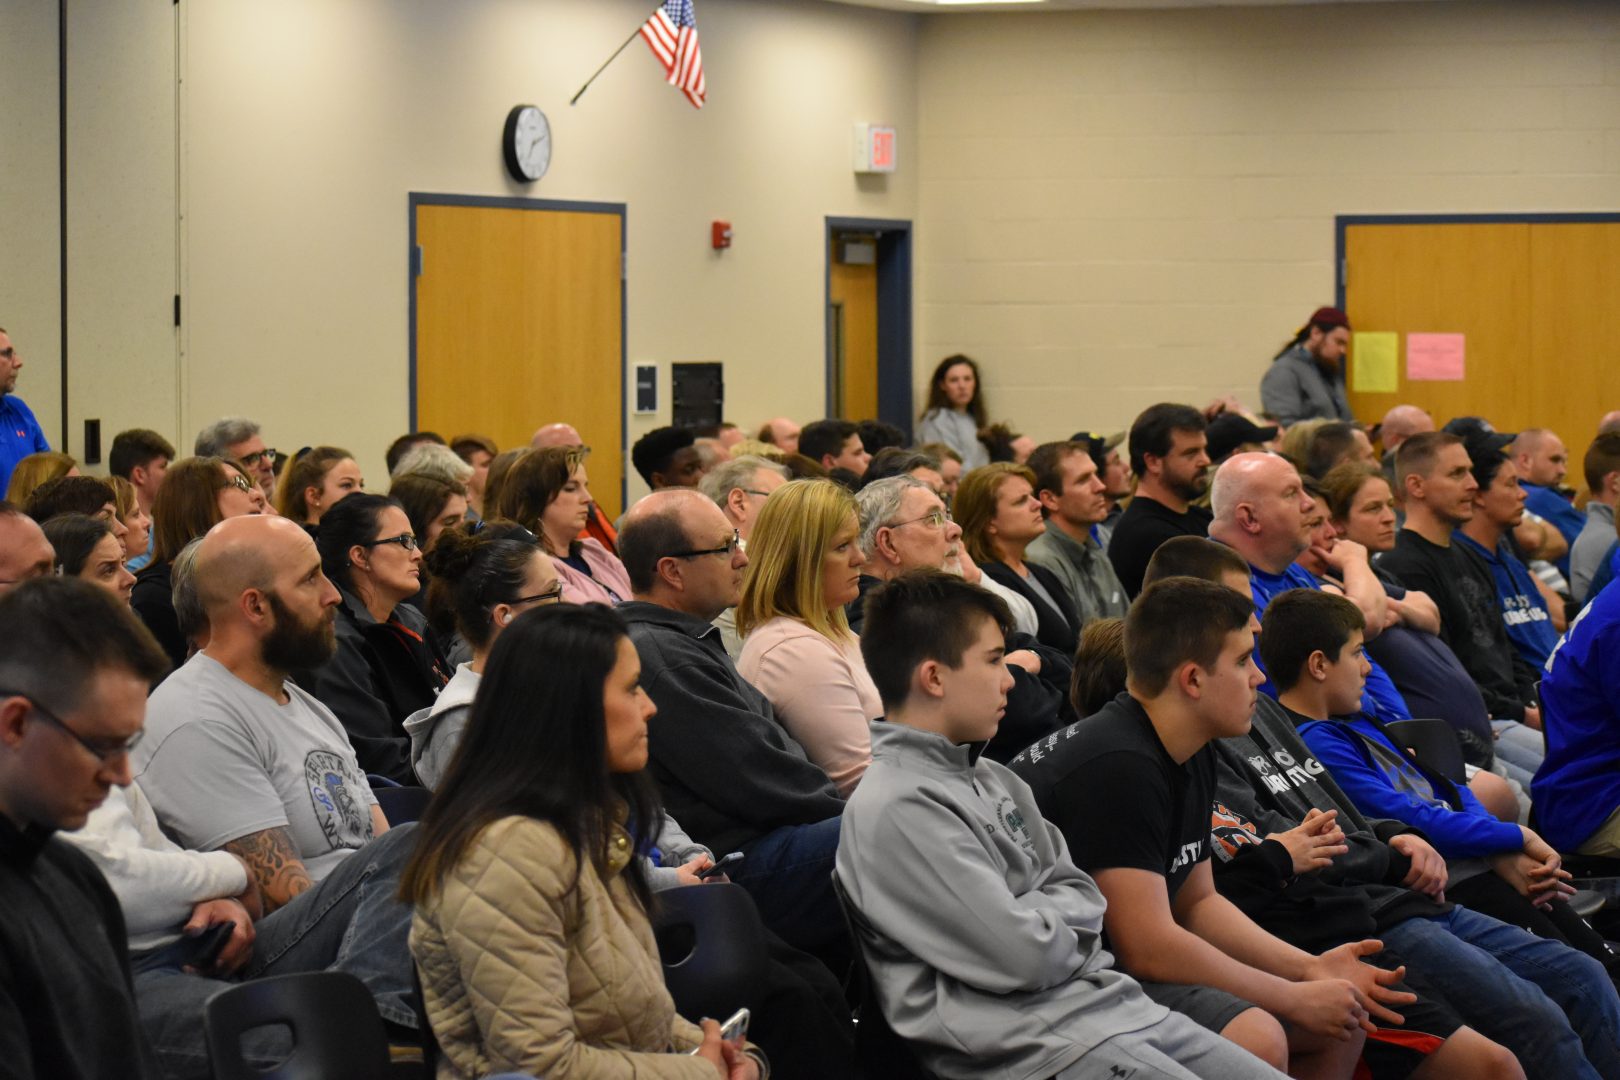 More than 200 people showed up for an Eastern Lancaster County school board meeting on April 15, 2019.